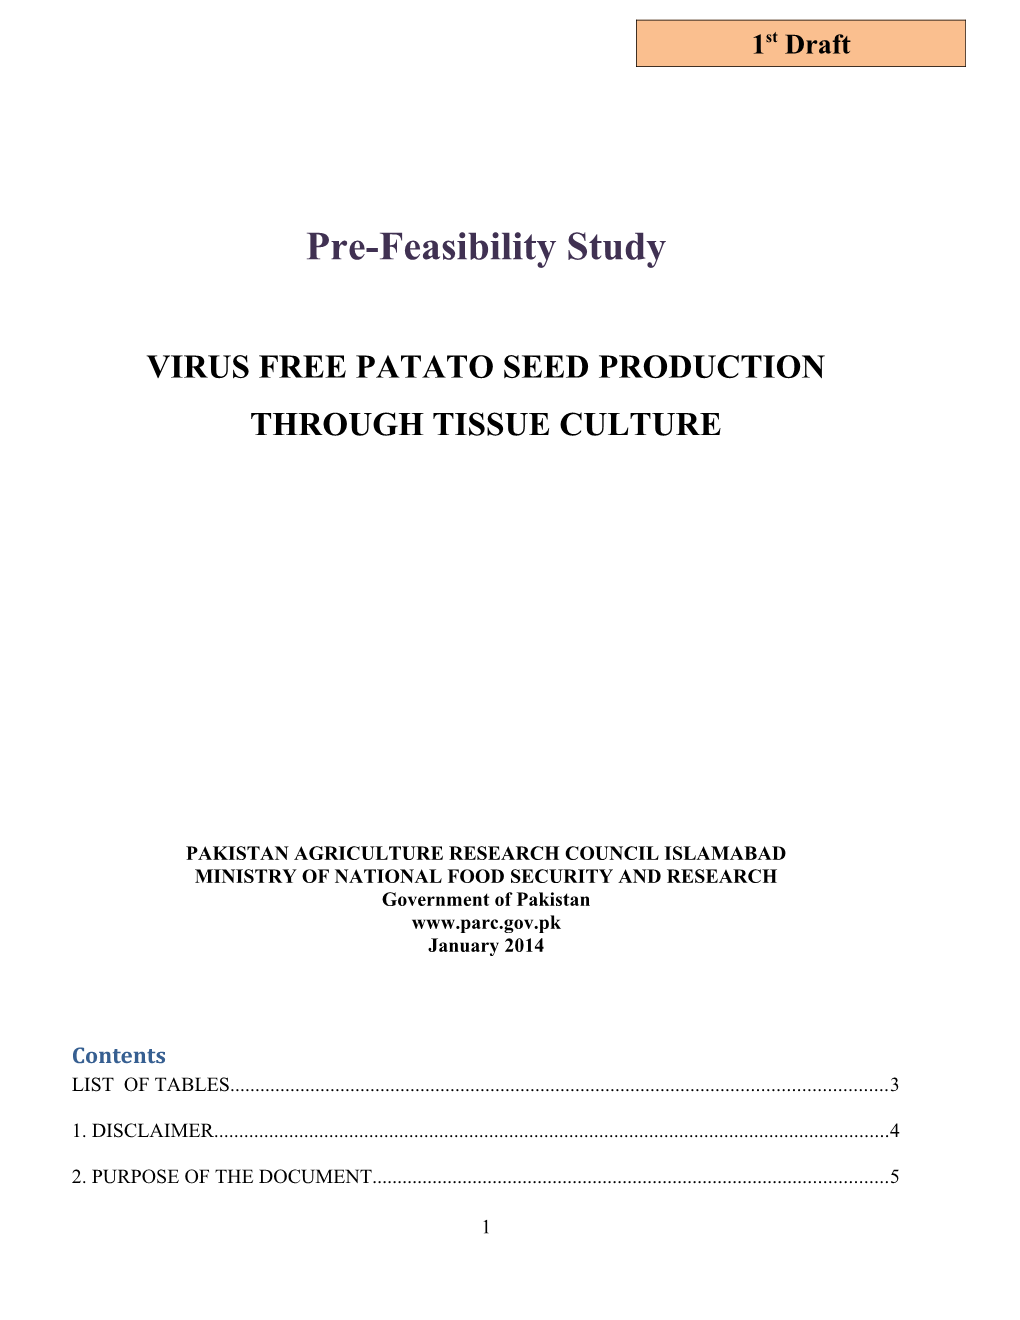 Virus Free Patato Seed Production Through Tissue Culture